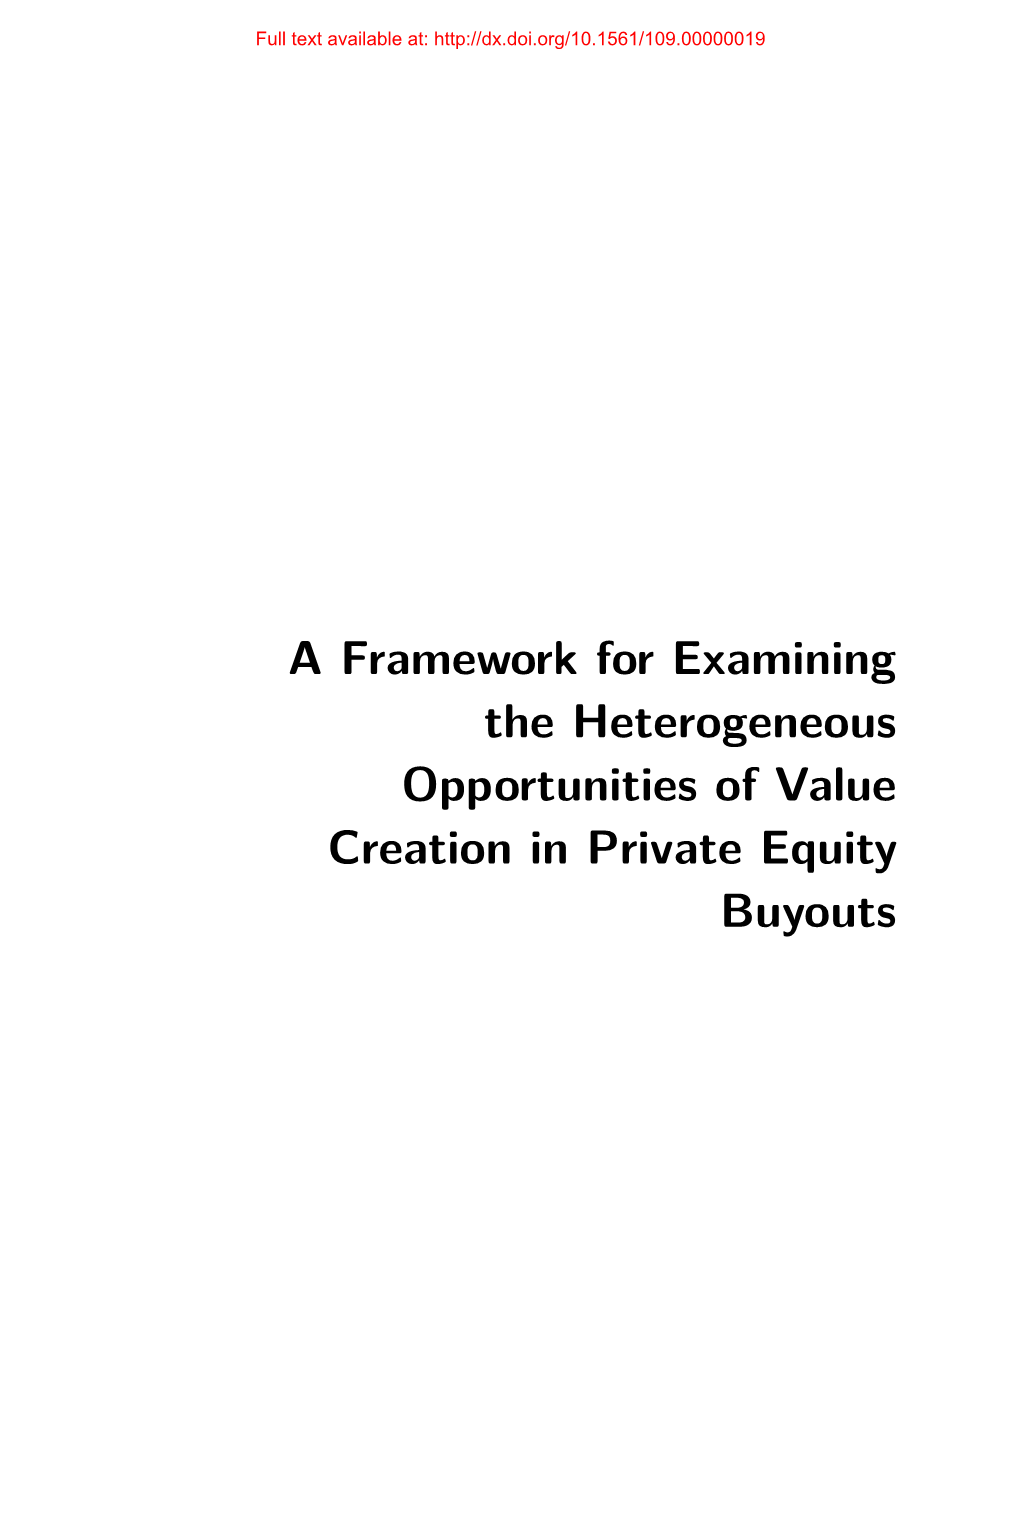 A Framework for Examining the Heterogeneous Opportunities of Value Creation in Private Equity Buyouts Full Text Available At